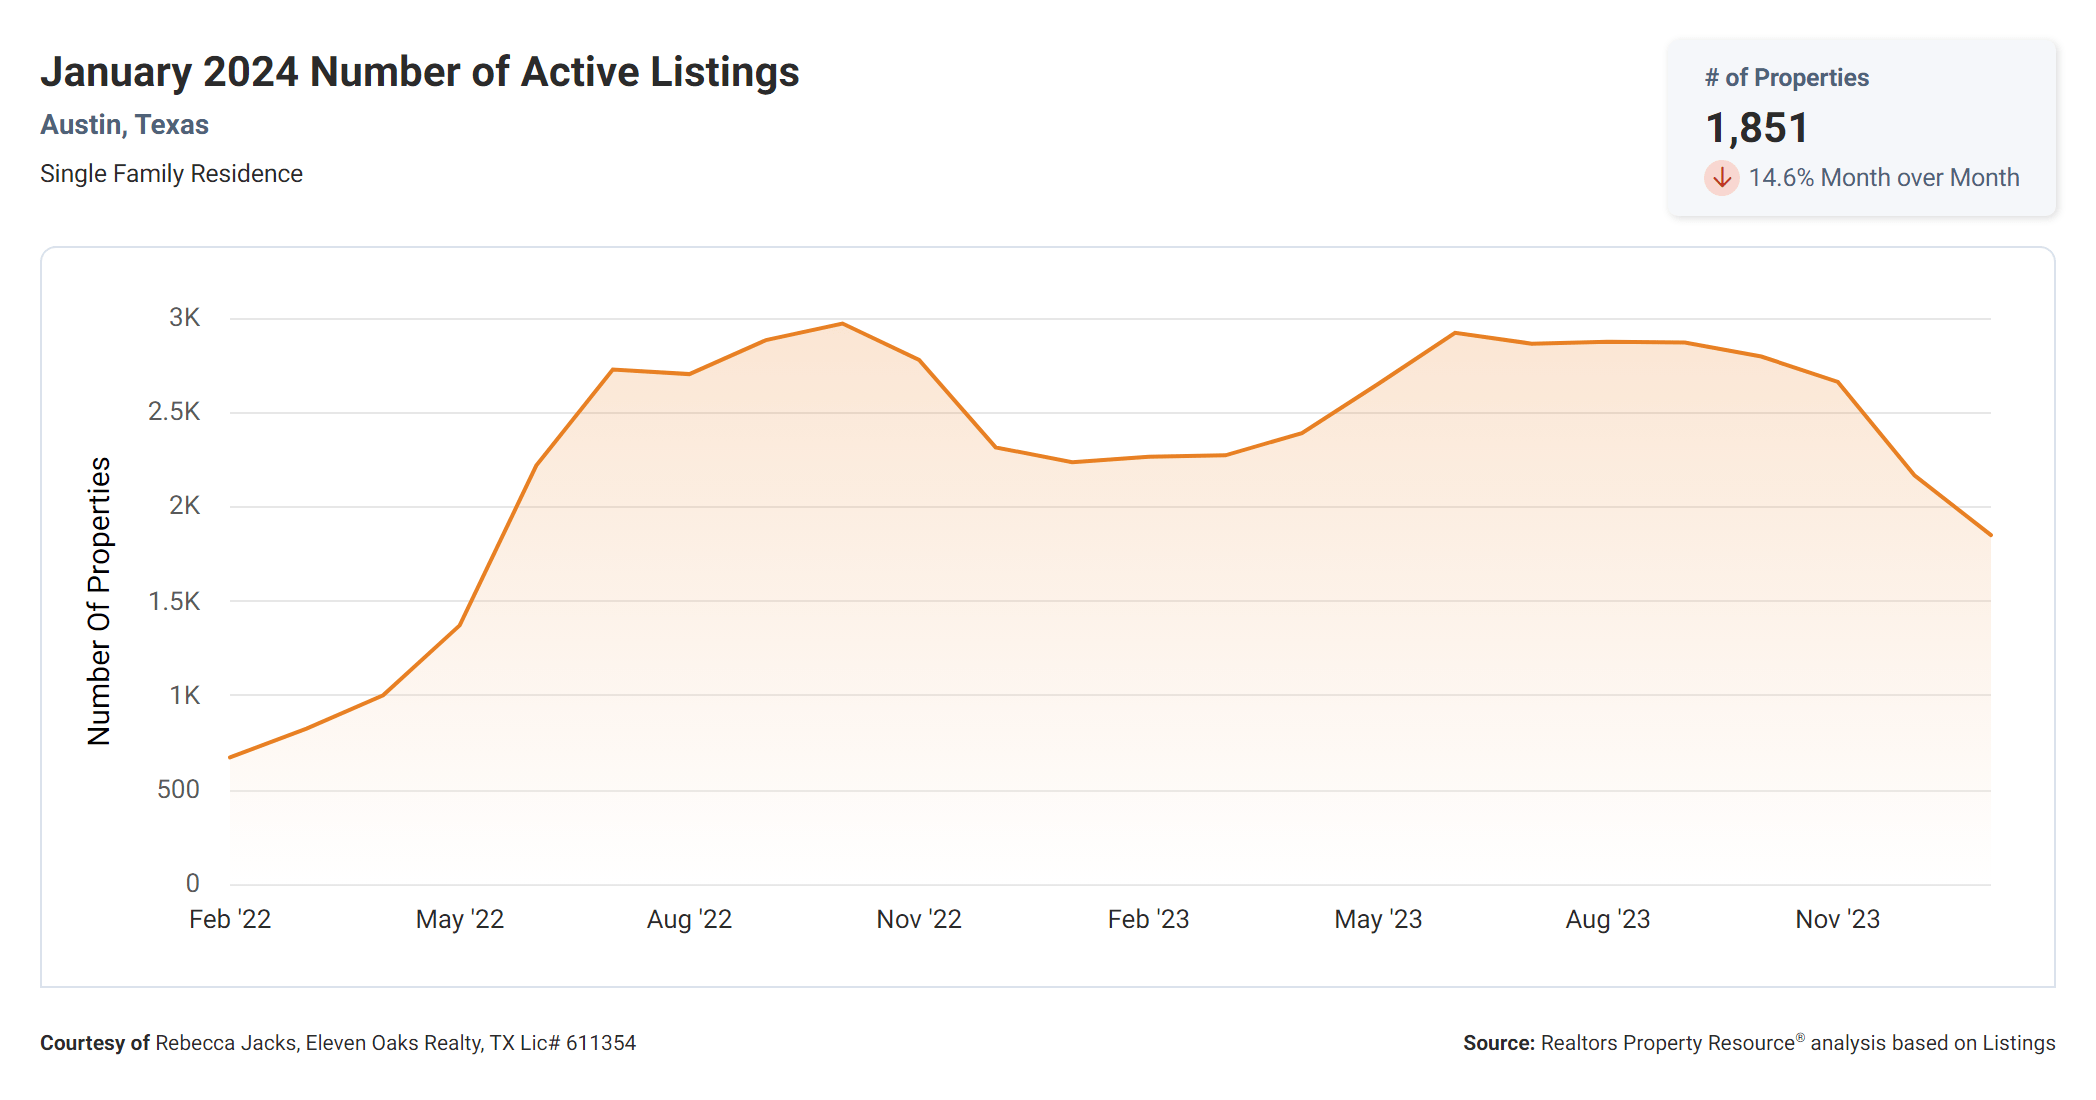 January 2024 number of active listings